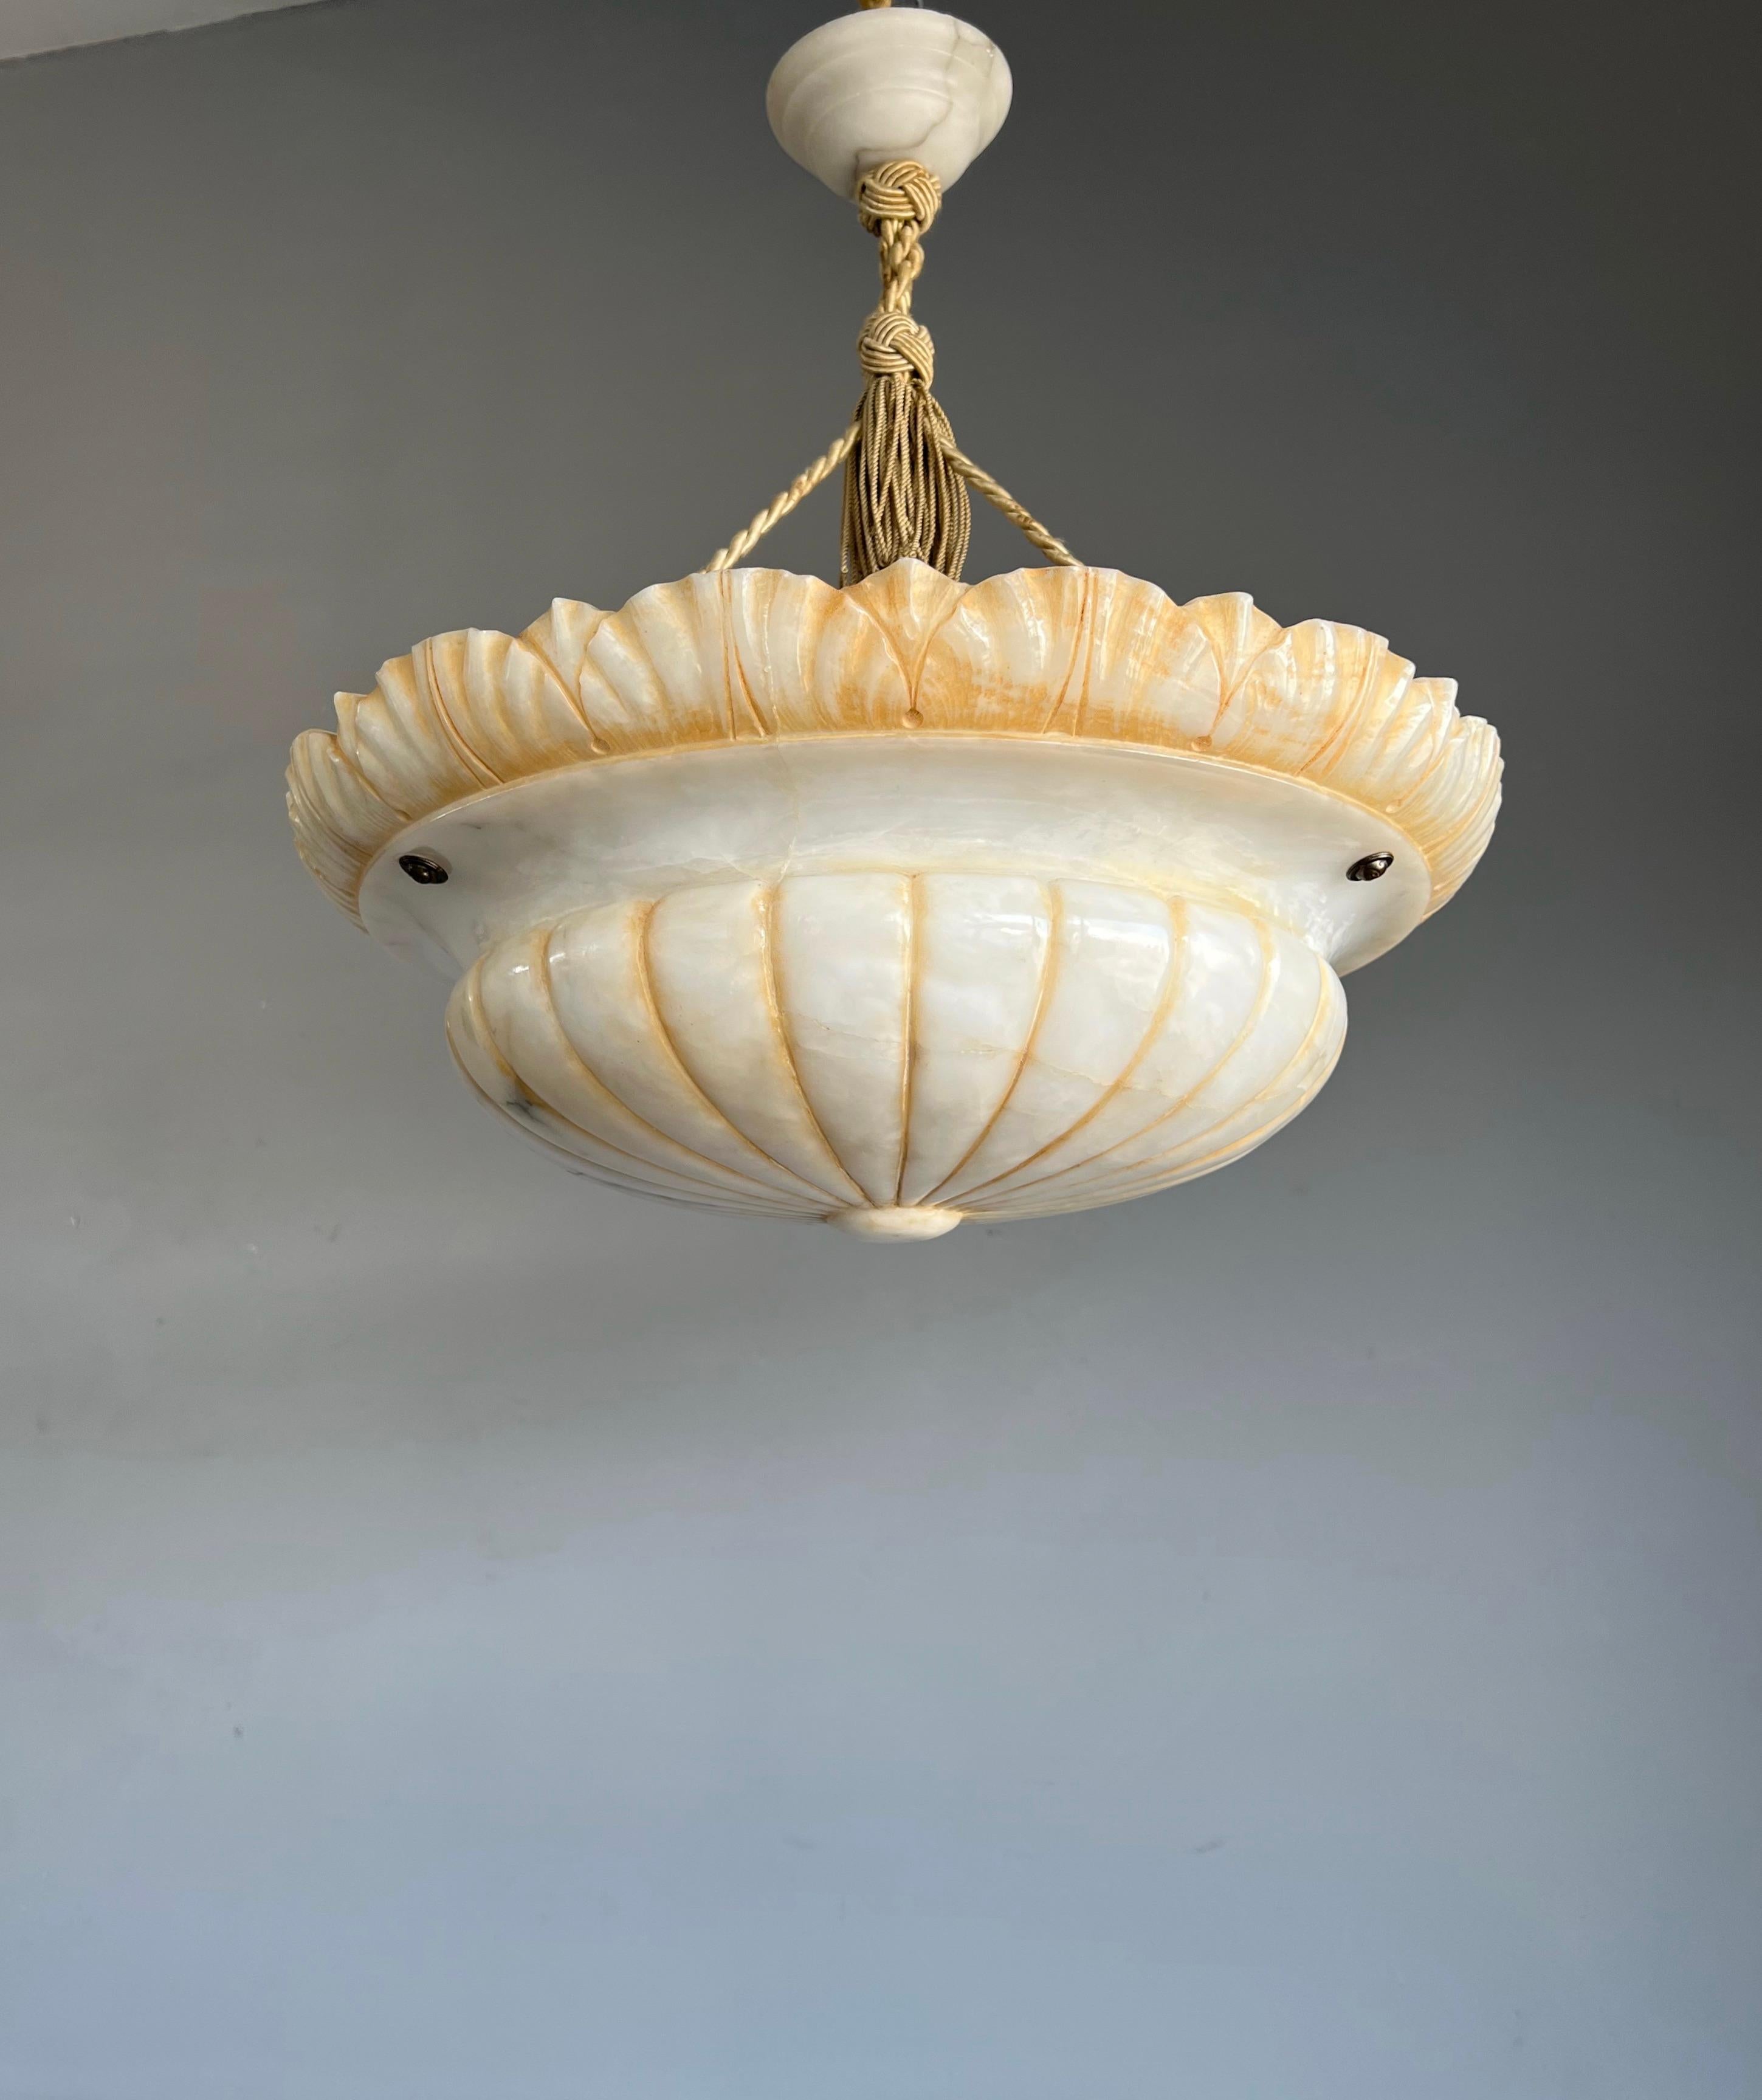 Large size and great design, hand carved, antique alabaster chandelier.

Thanks to its large size and unique design this antique and remarkable alabaster chandelier will be a real eyecatcher in your interior. This one of a kind specimen is in very